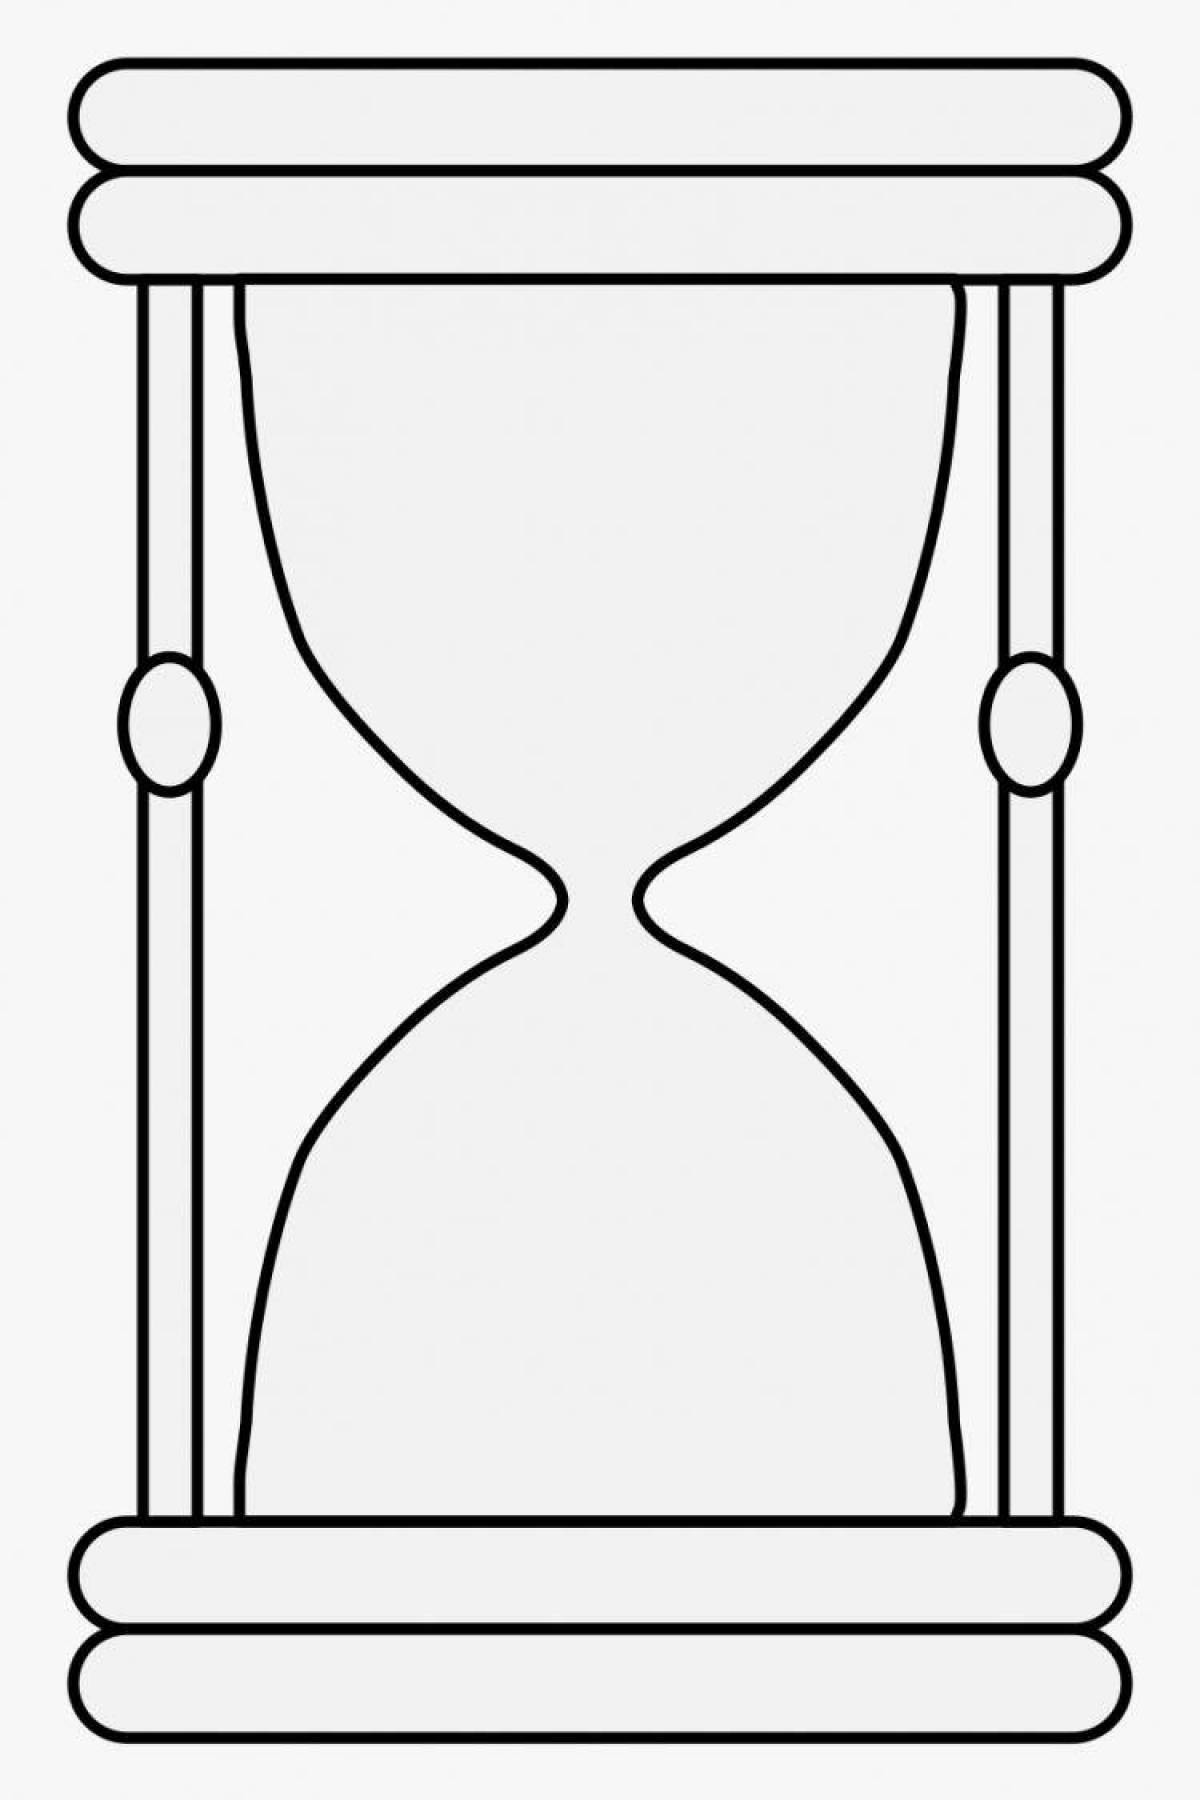 Majestic hourglass coloring page